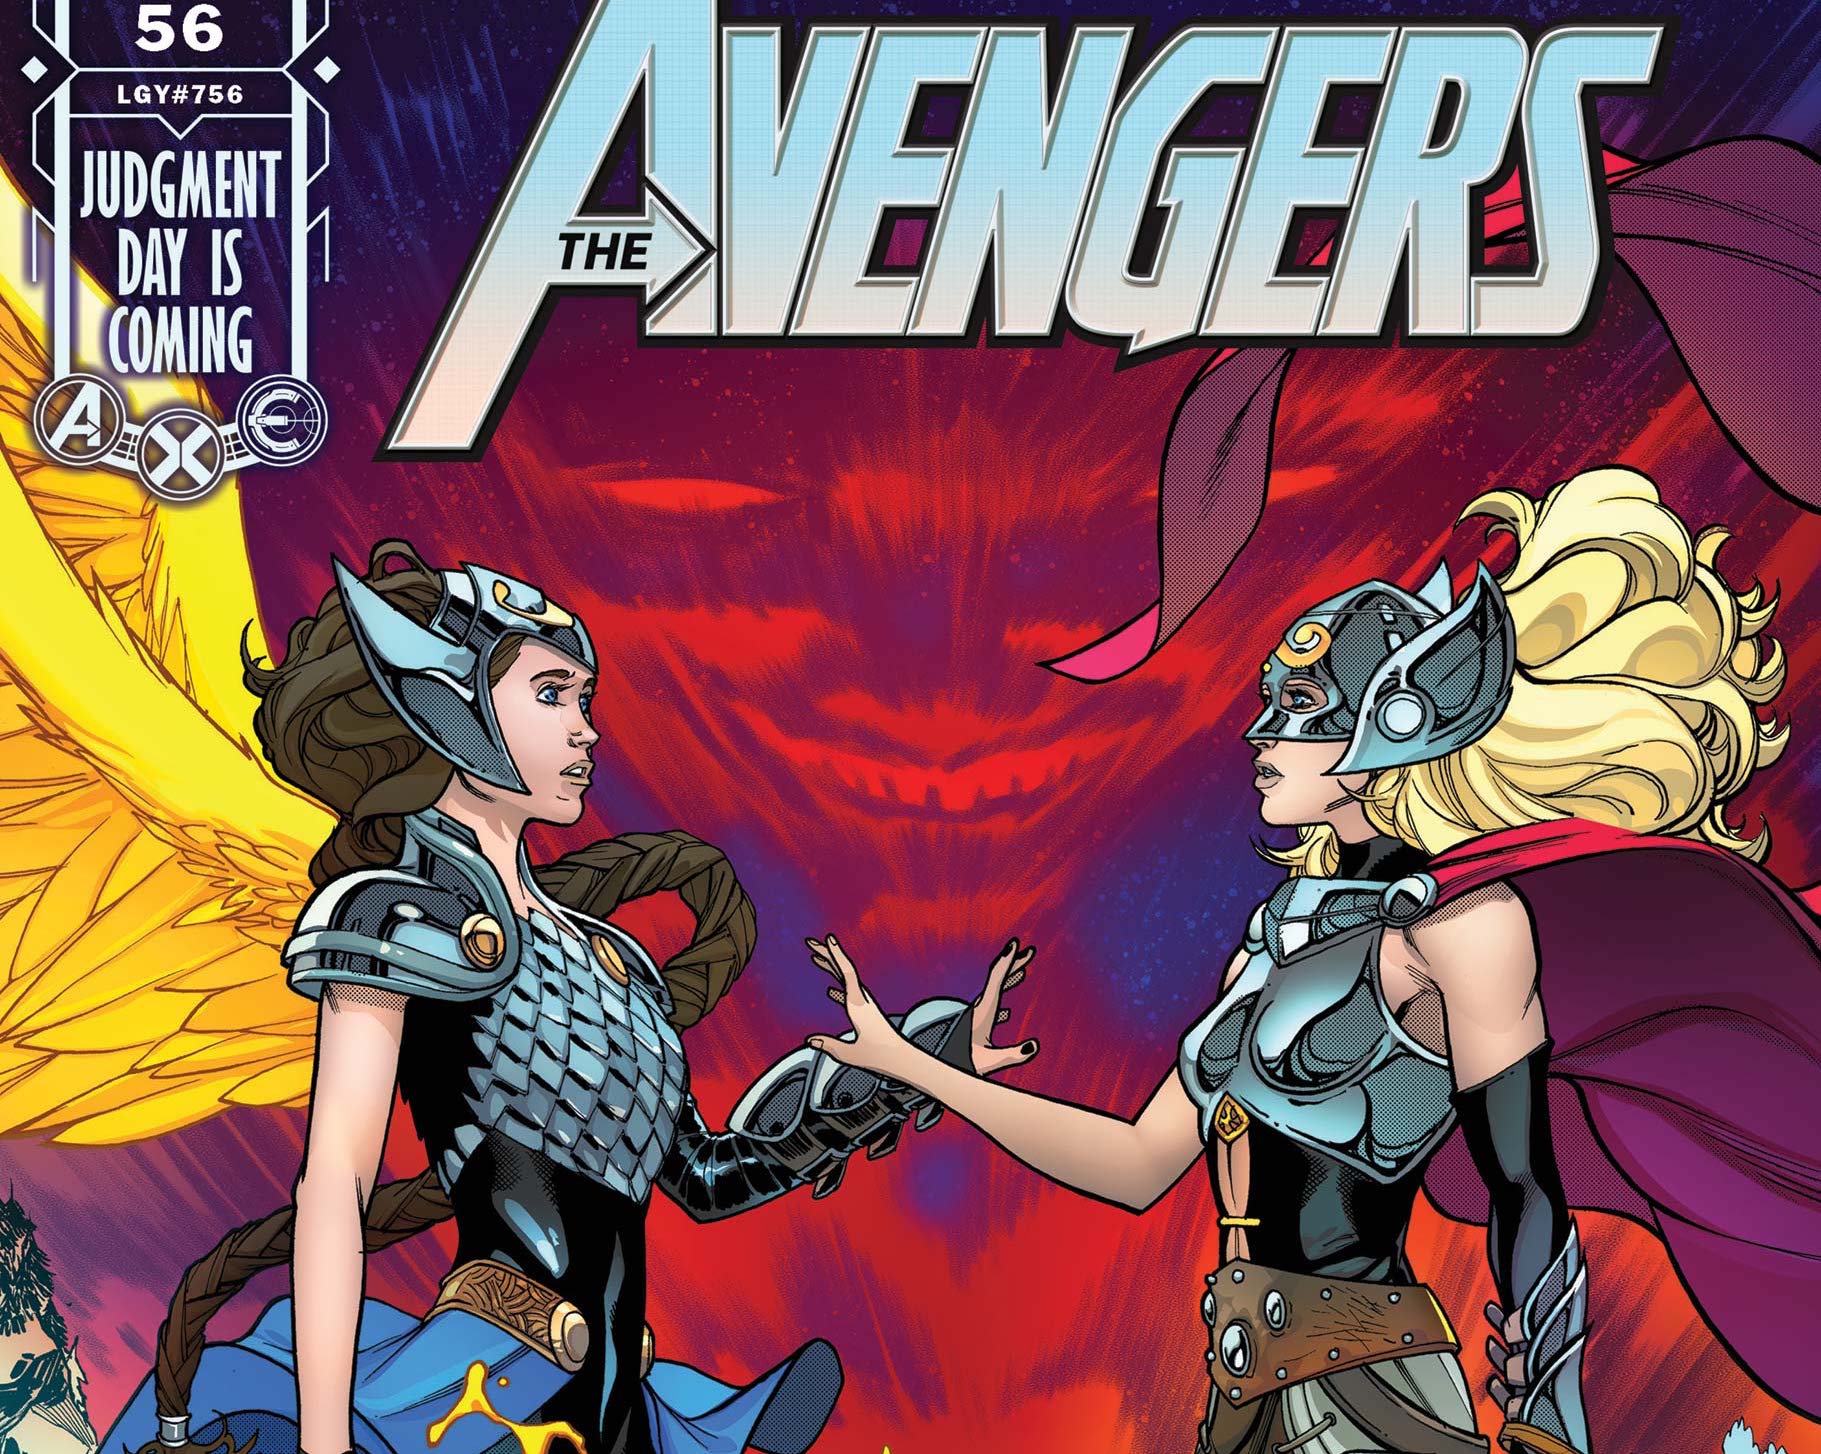 'Avengers' #56 is a great Jane Foster Thor story